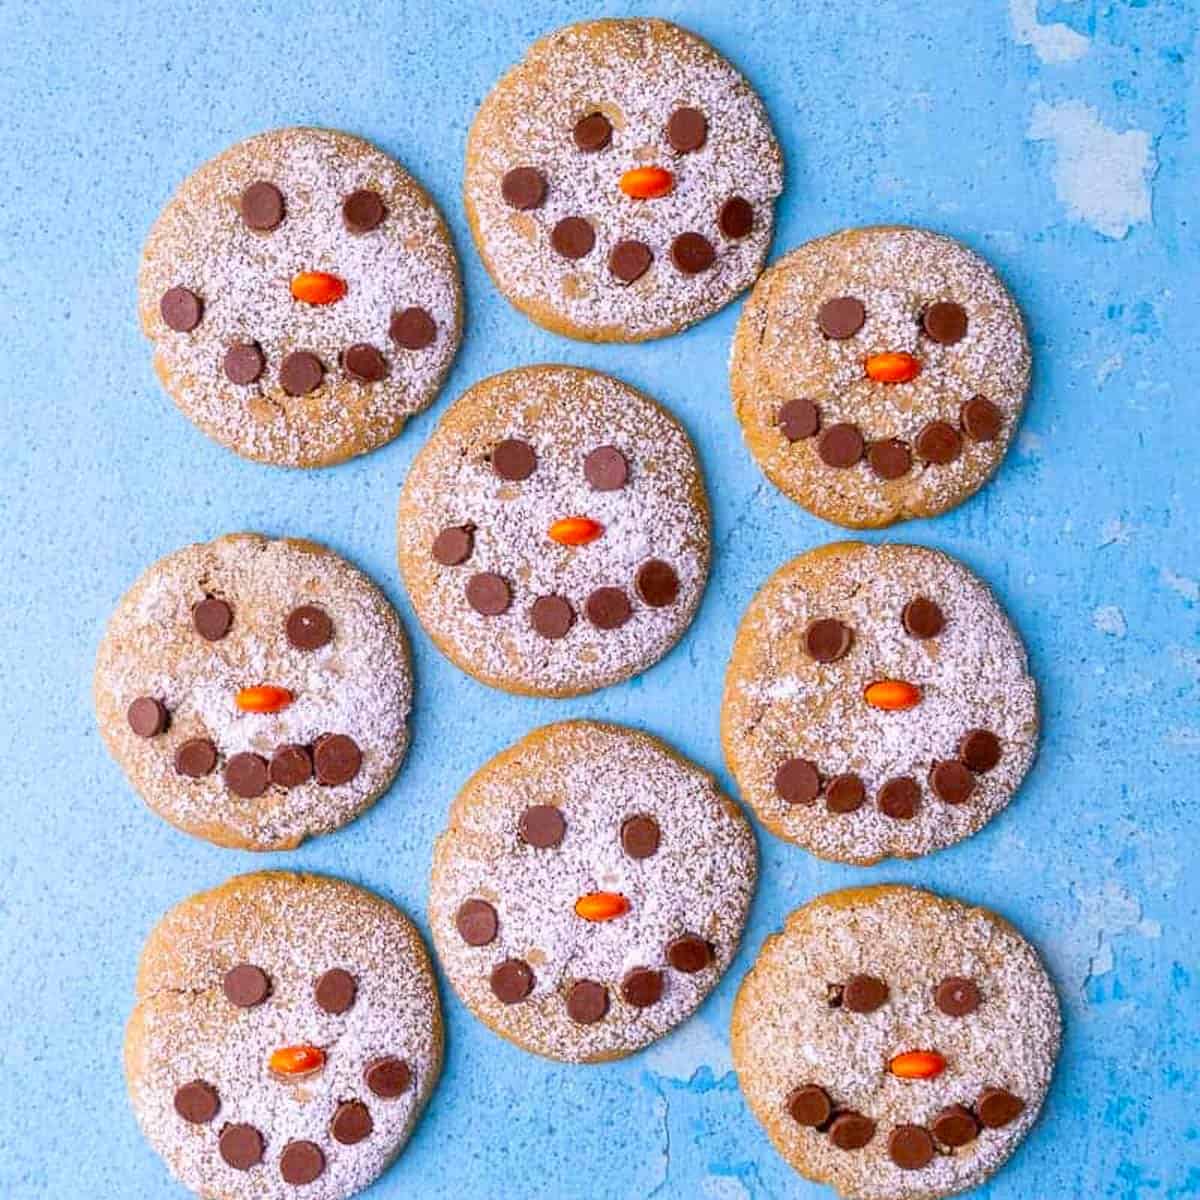 A bunch of round cookies with chocolate chips shaped like eye and a smile.